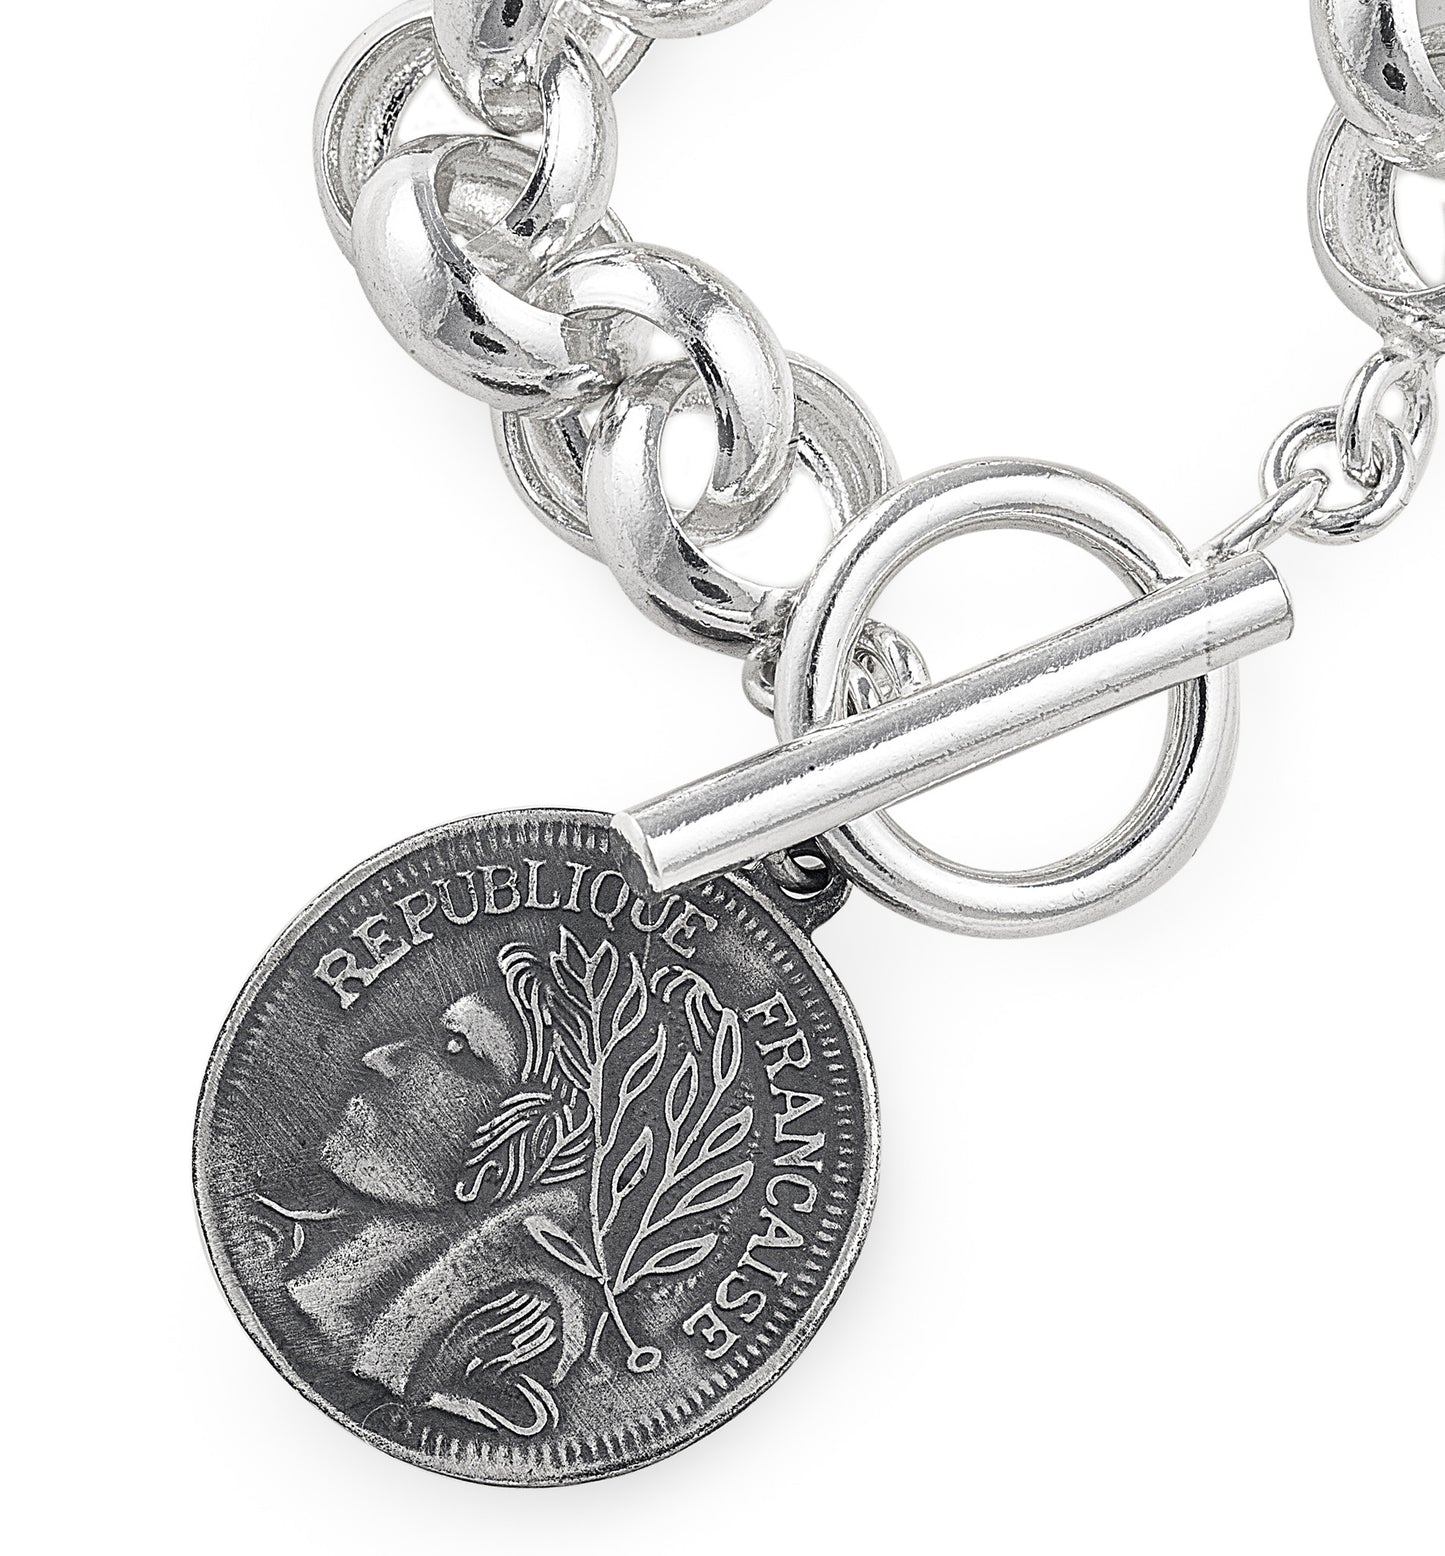 Romana Bracelet with Coin Charm in 925 Sterling Silver with Toggle Clasp. Belcher Style Bracelet. Worldwide Shipping from Australia. Affordable luxury jewellery by Bellagio & Co.